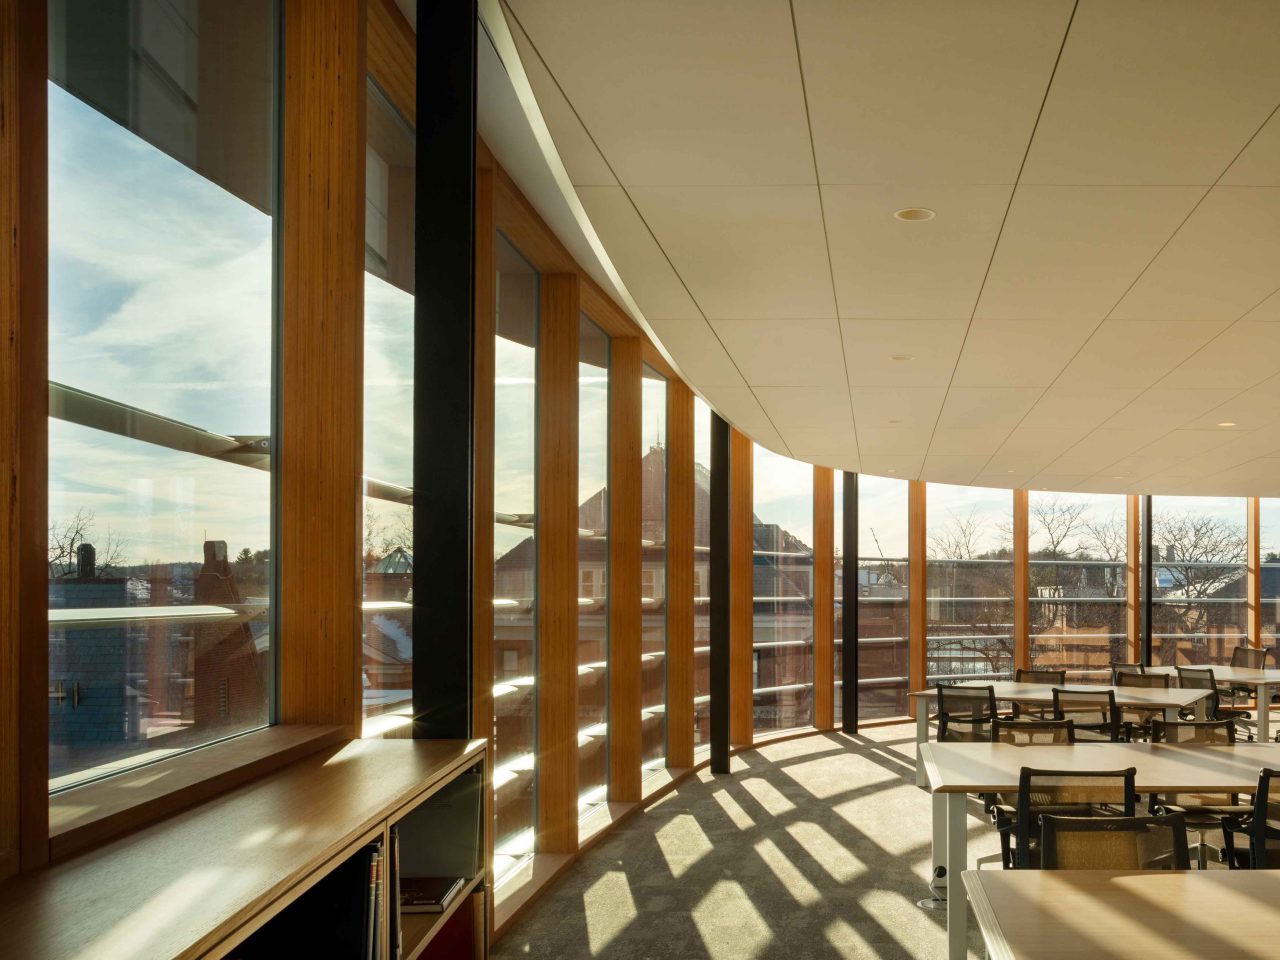 Smith College Neilson Library Smith College Neilson Library interior view wood facade with curved insulated glass